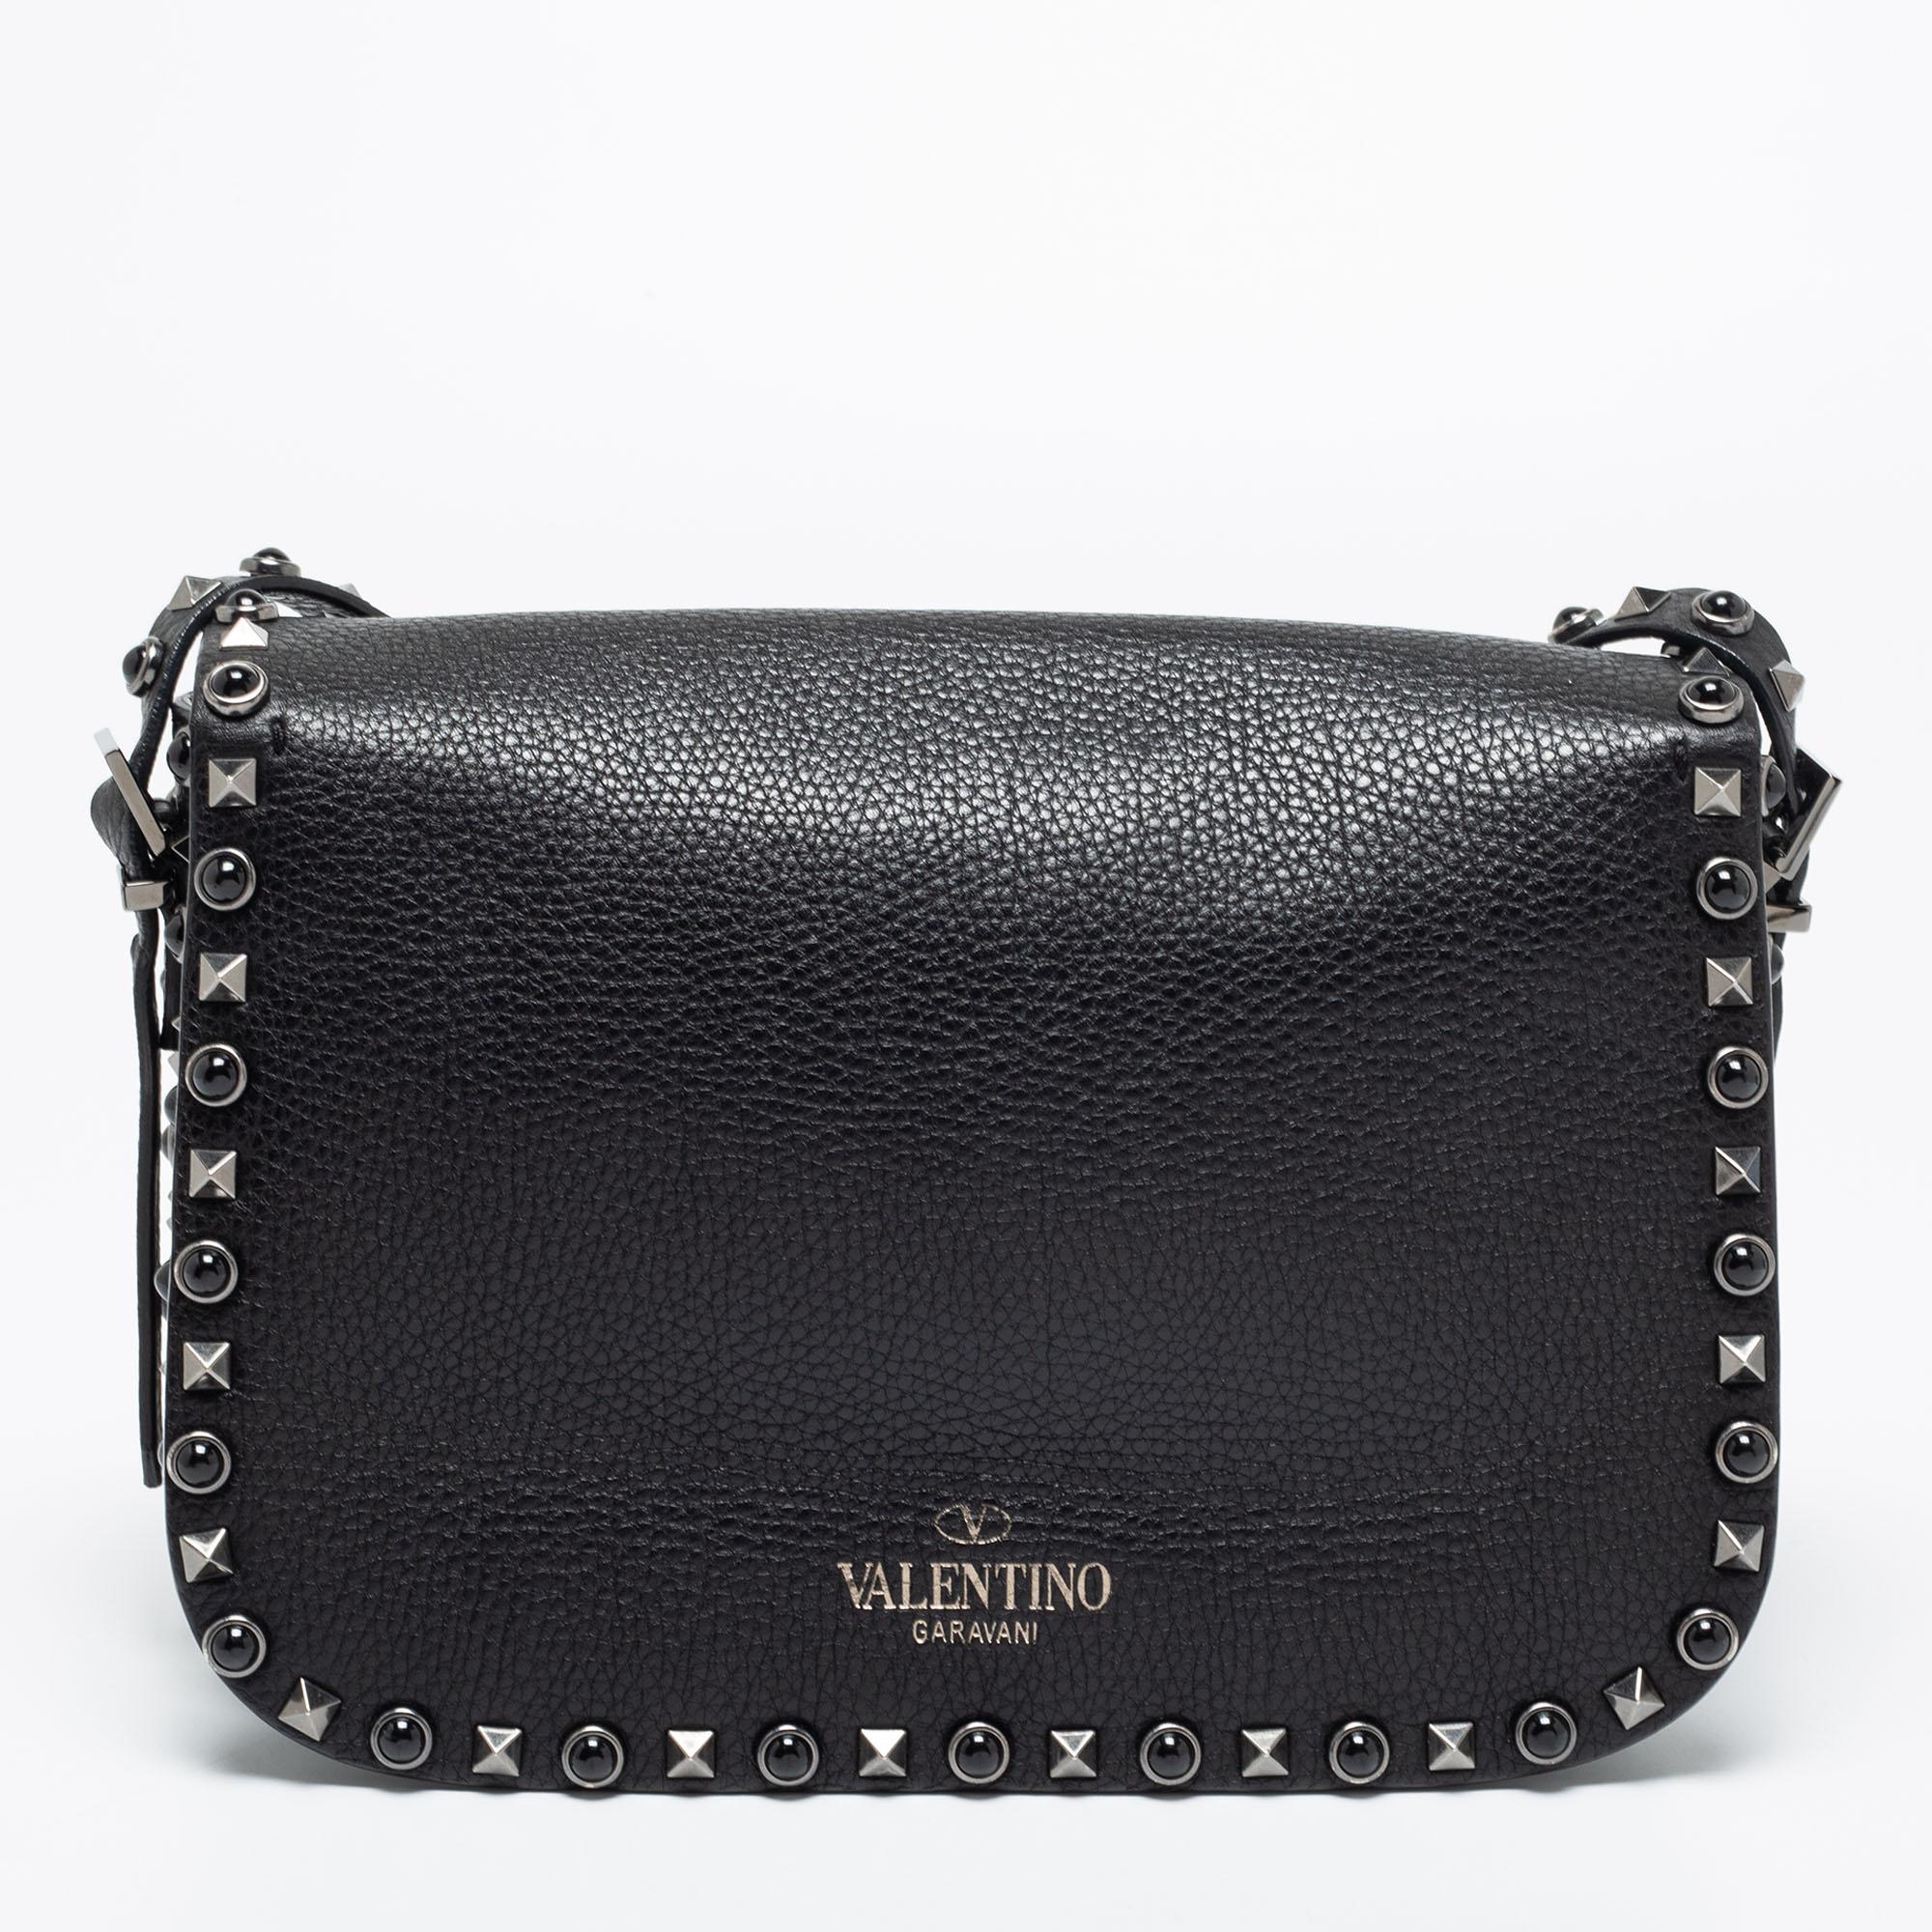 With meticulous craftsmanship and glamorous details, this Valentino bag reflects the brand's expertise in creating innovative and admirable designs. The Rolling Rockstuds elegantly outlines it's exterior and makes it undeniably chic. Created from